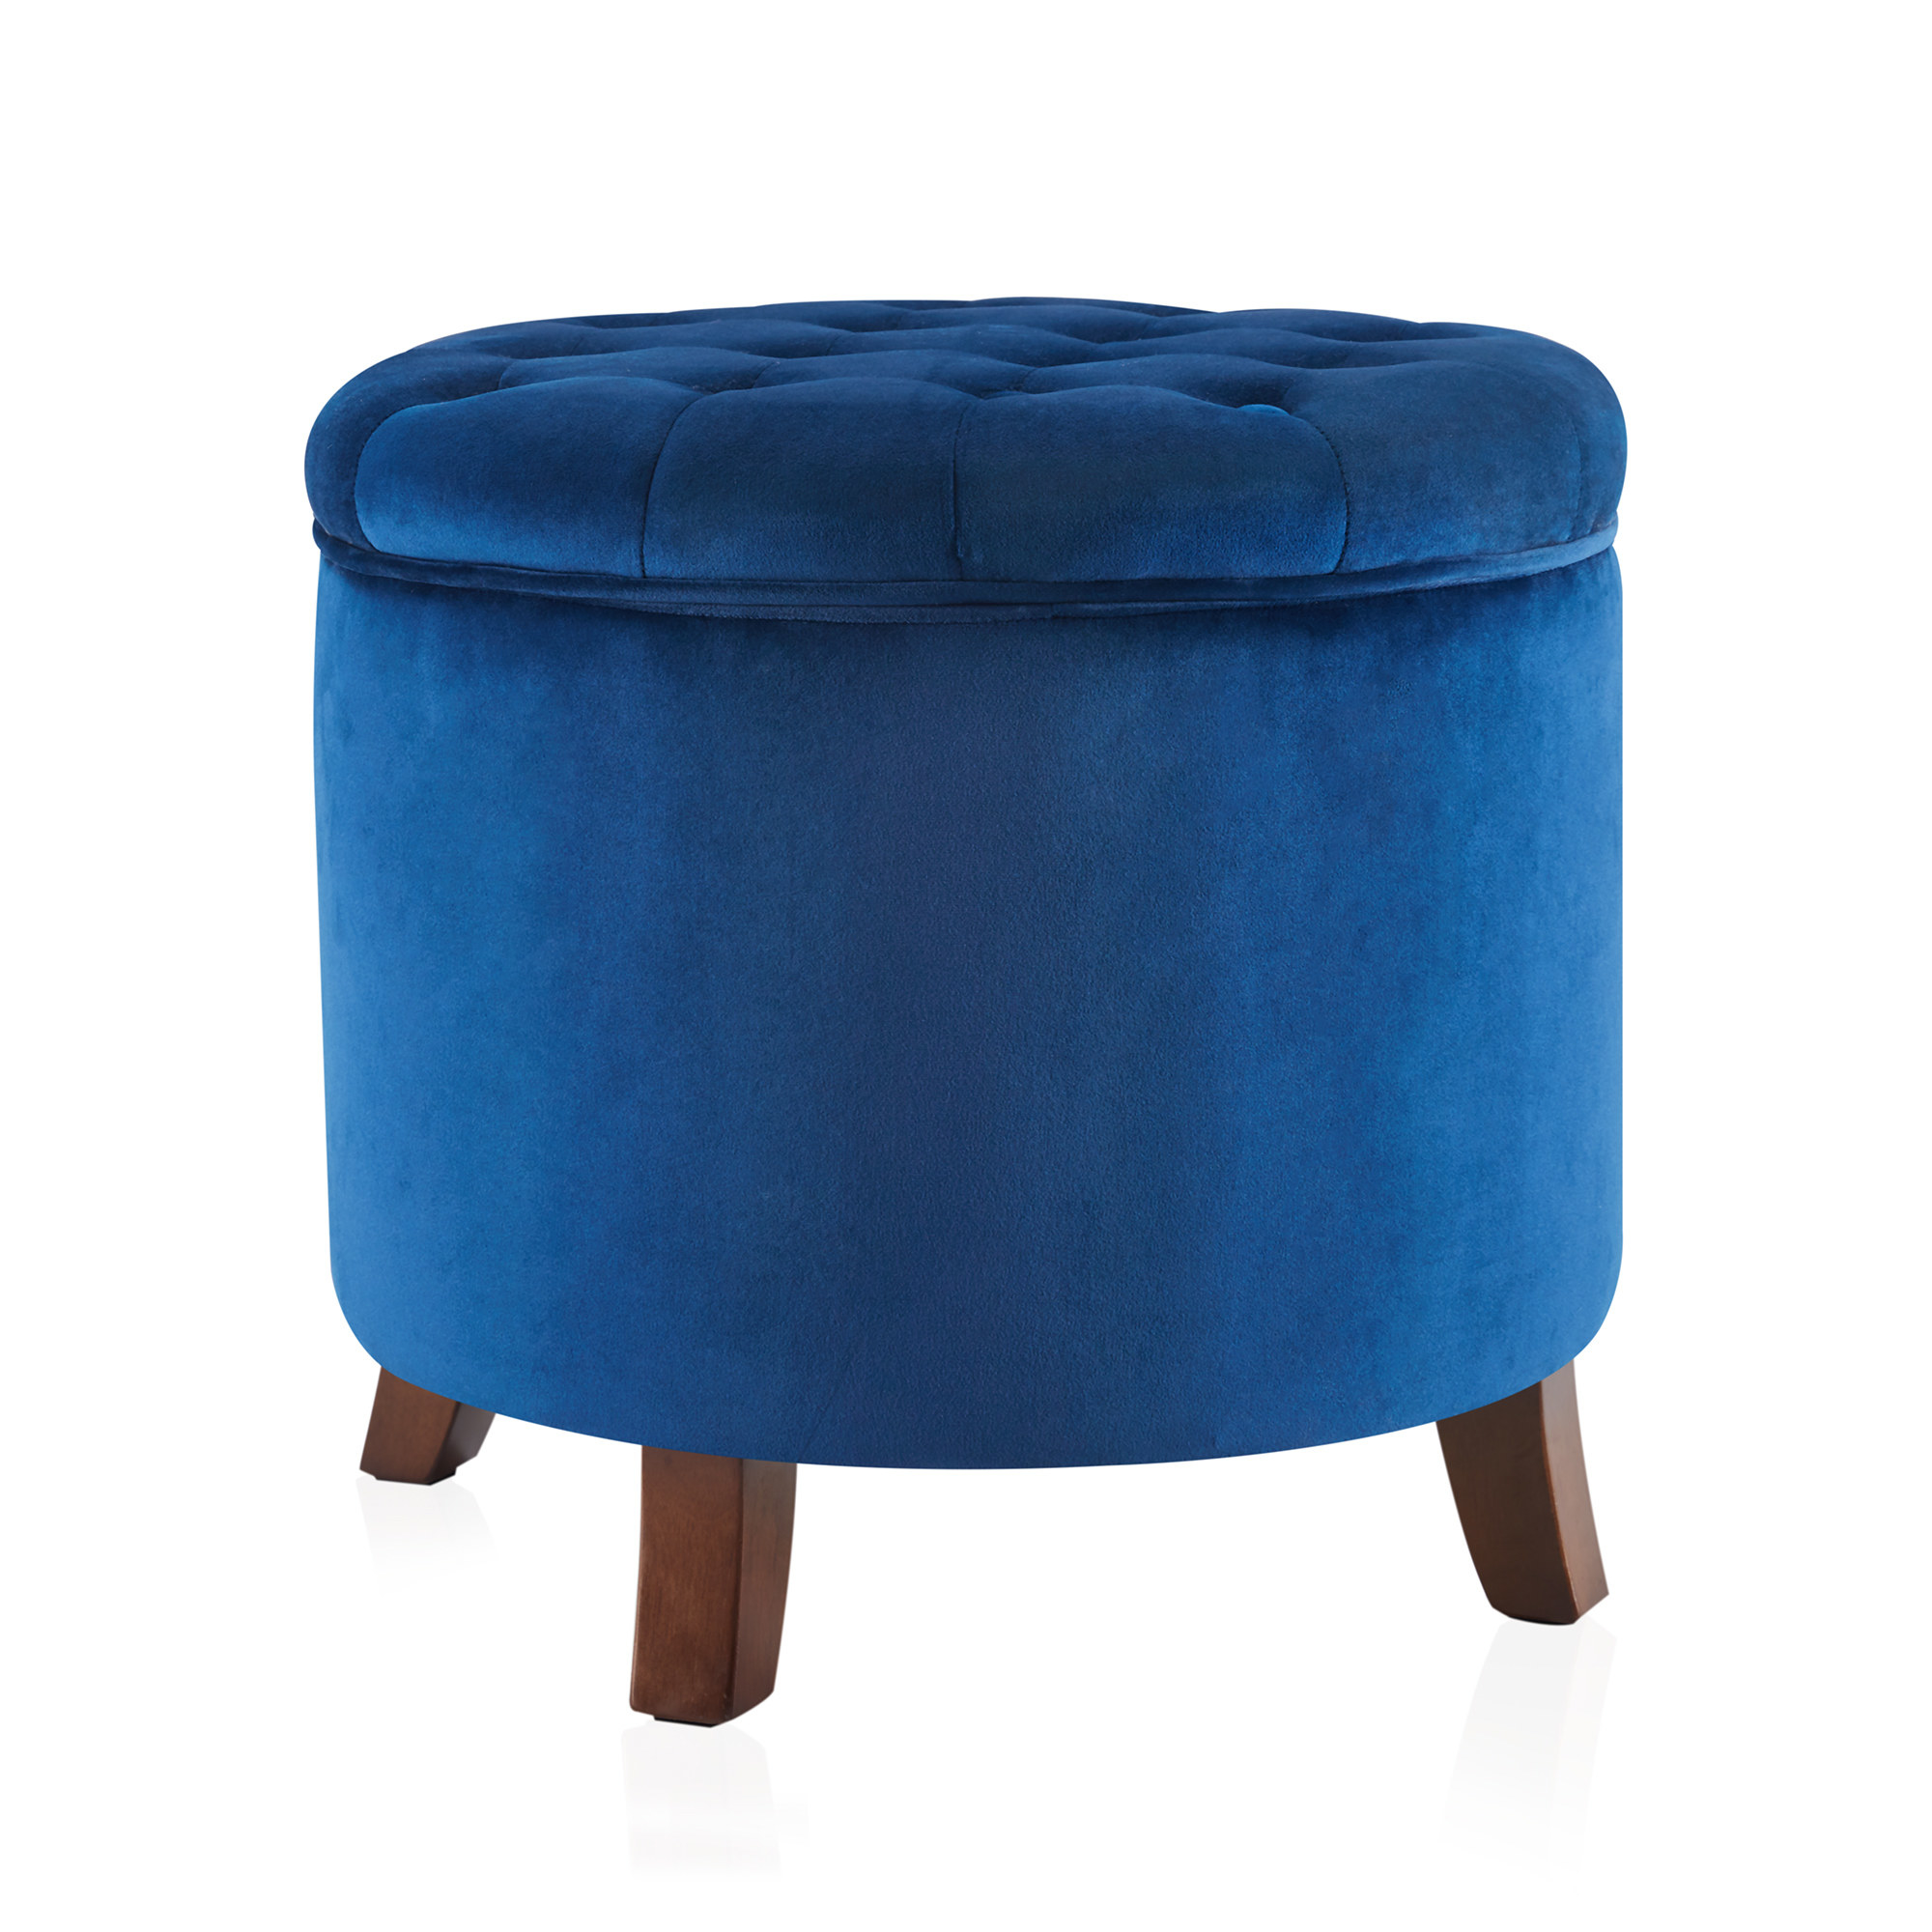 An image of a nail head round tufted storage ottoman